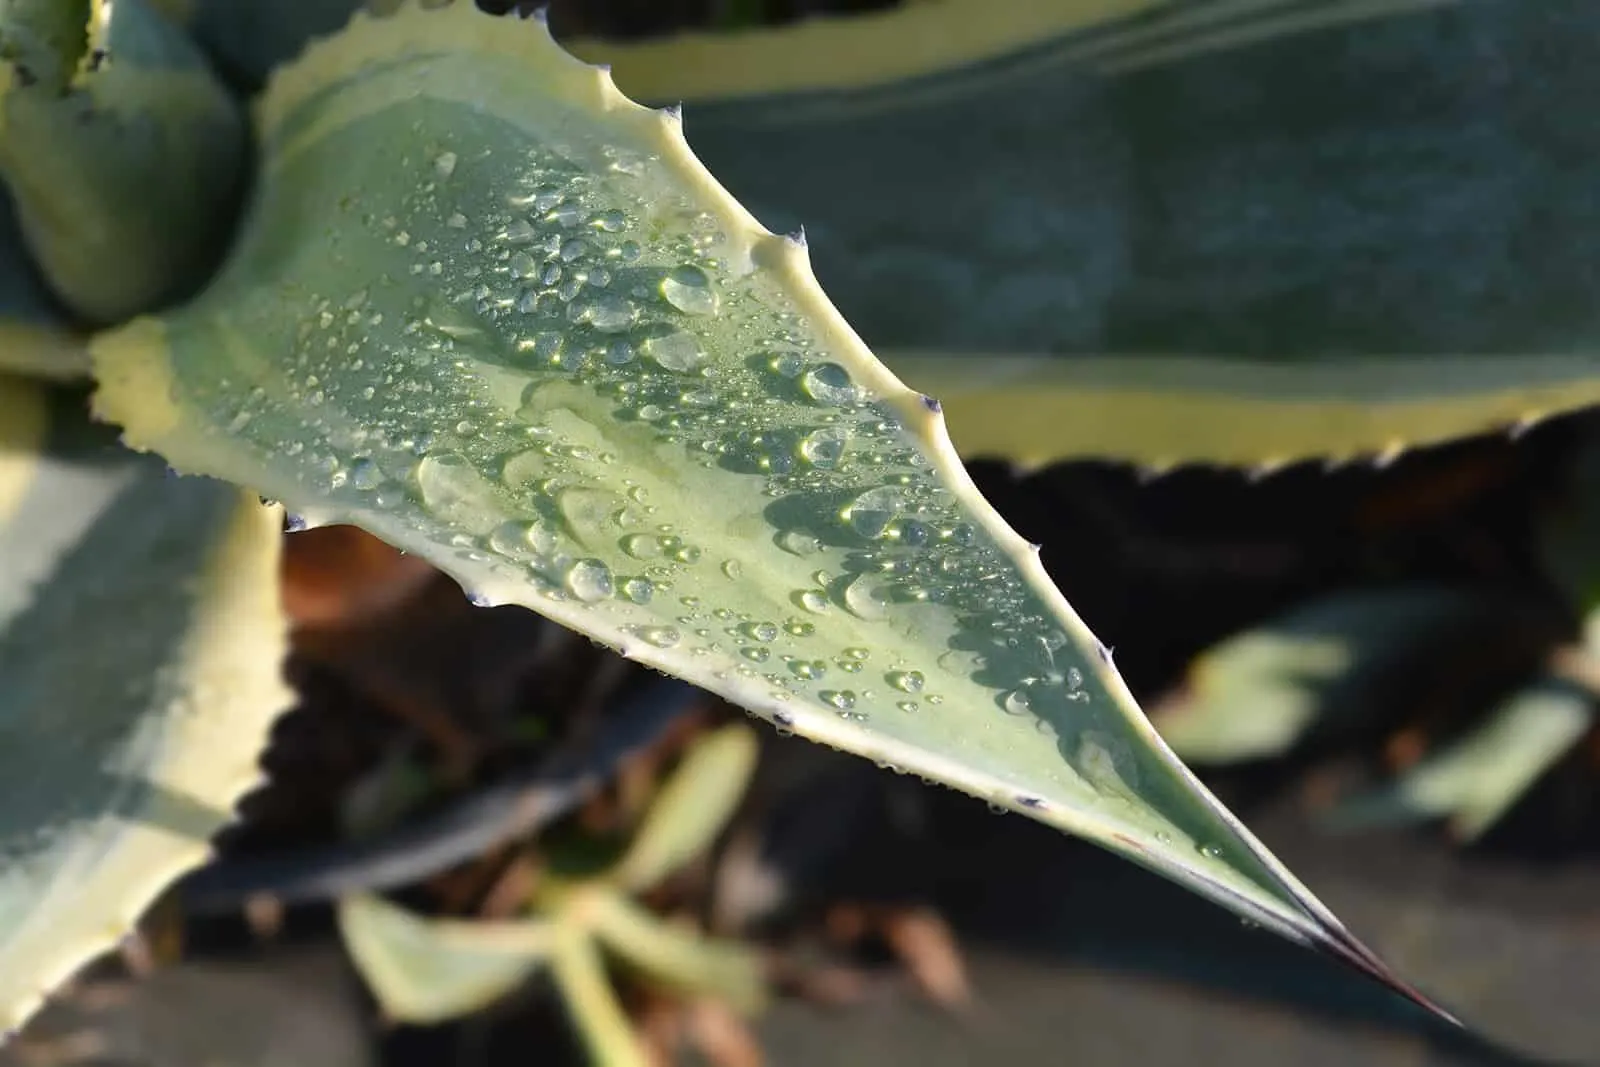 century plant leaves with water drops